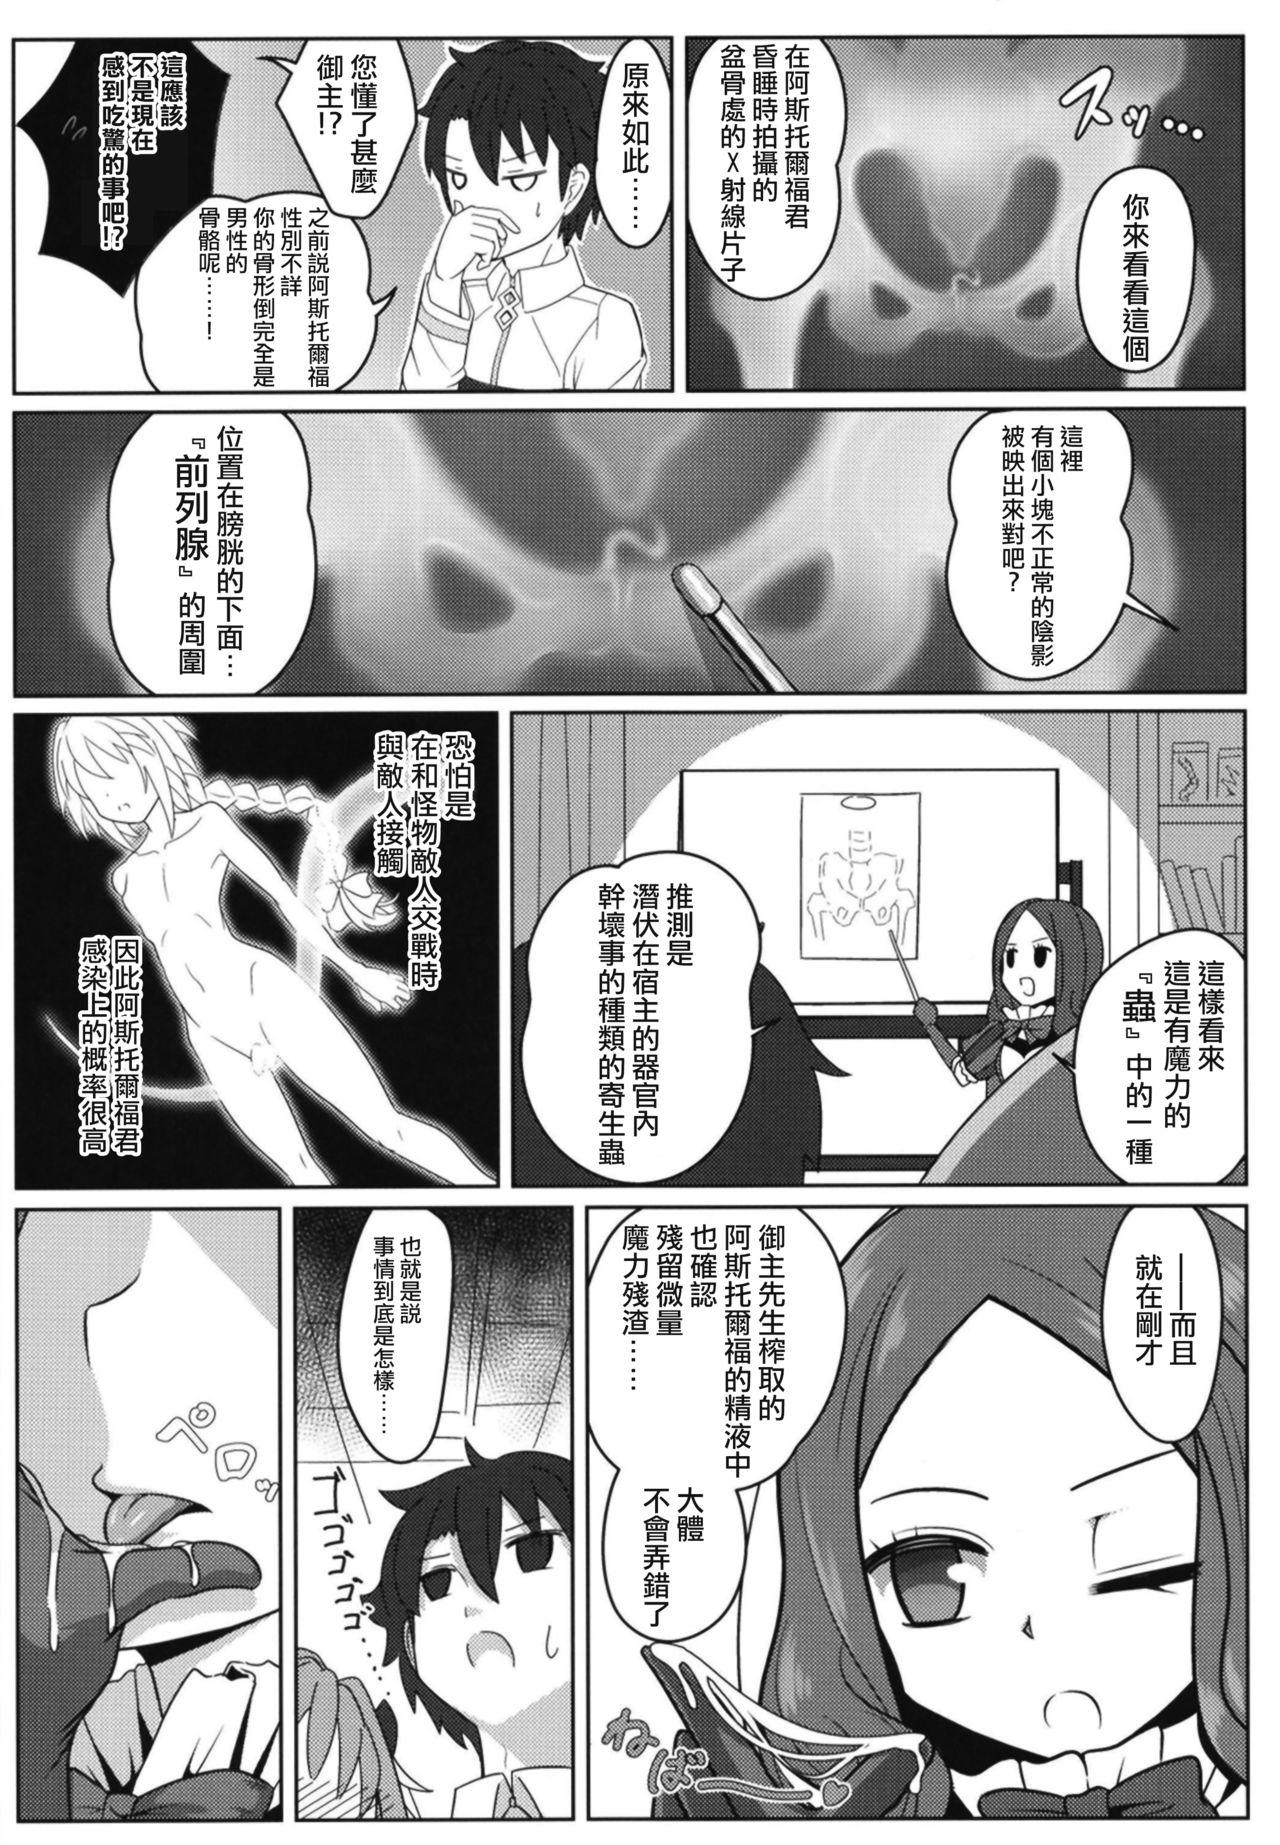 From Furereba Shasei! - Fate grand order Blowing - Page 9